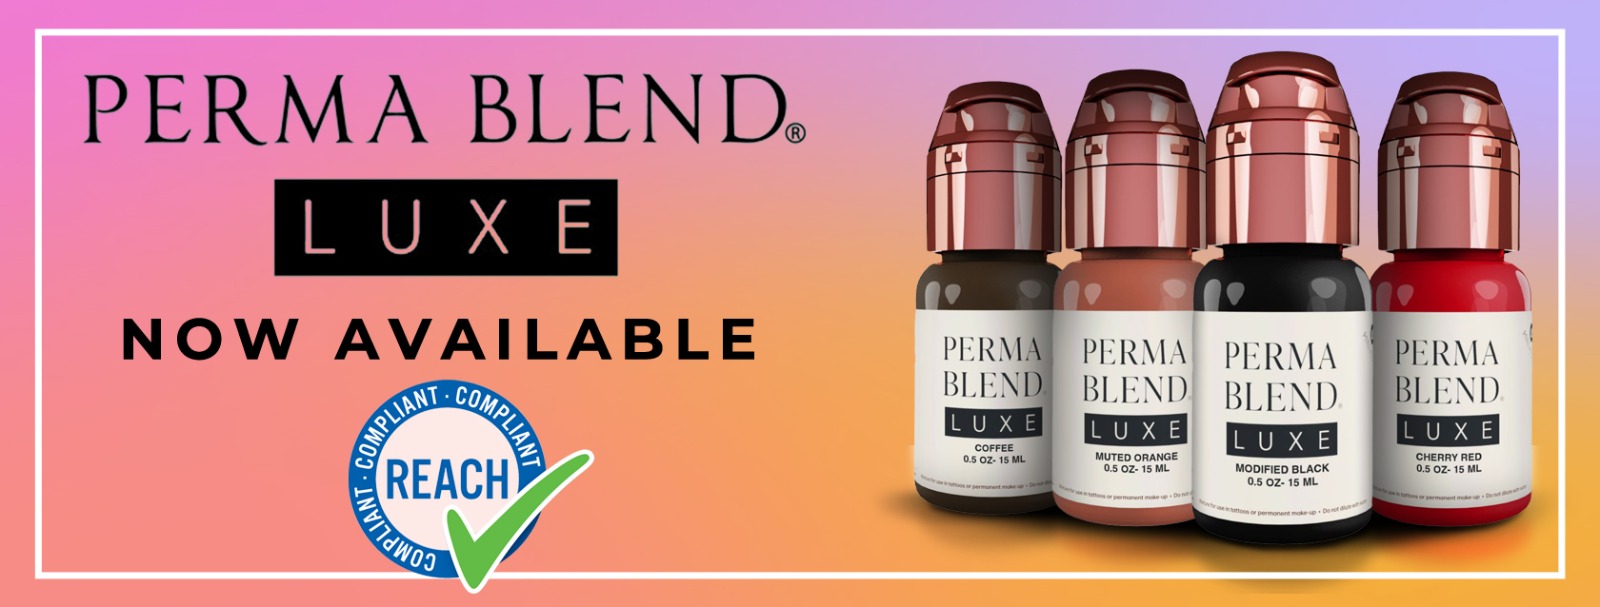 Perma Blend Luxe